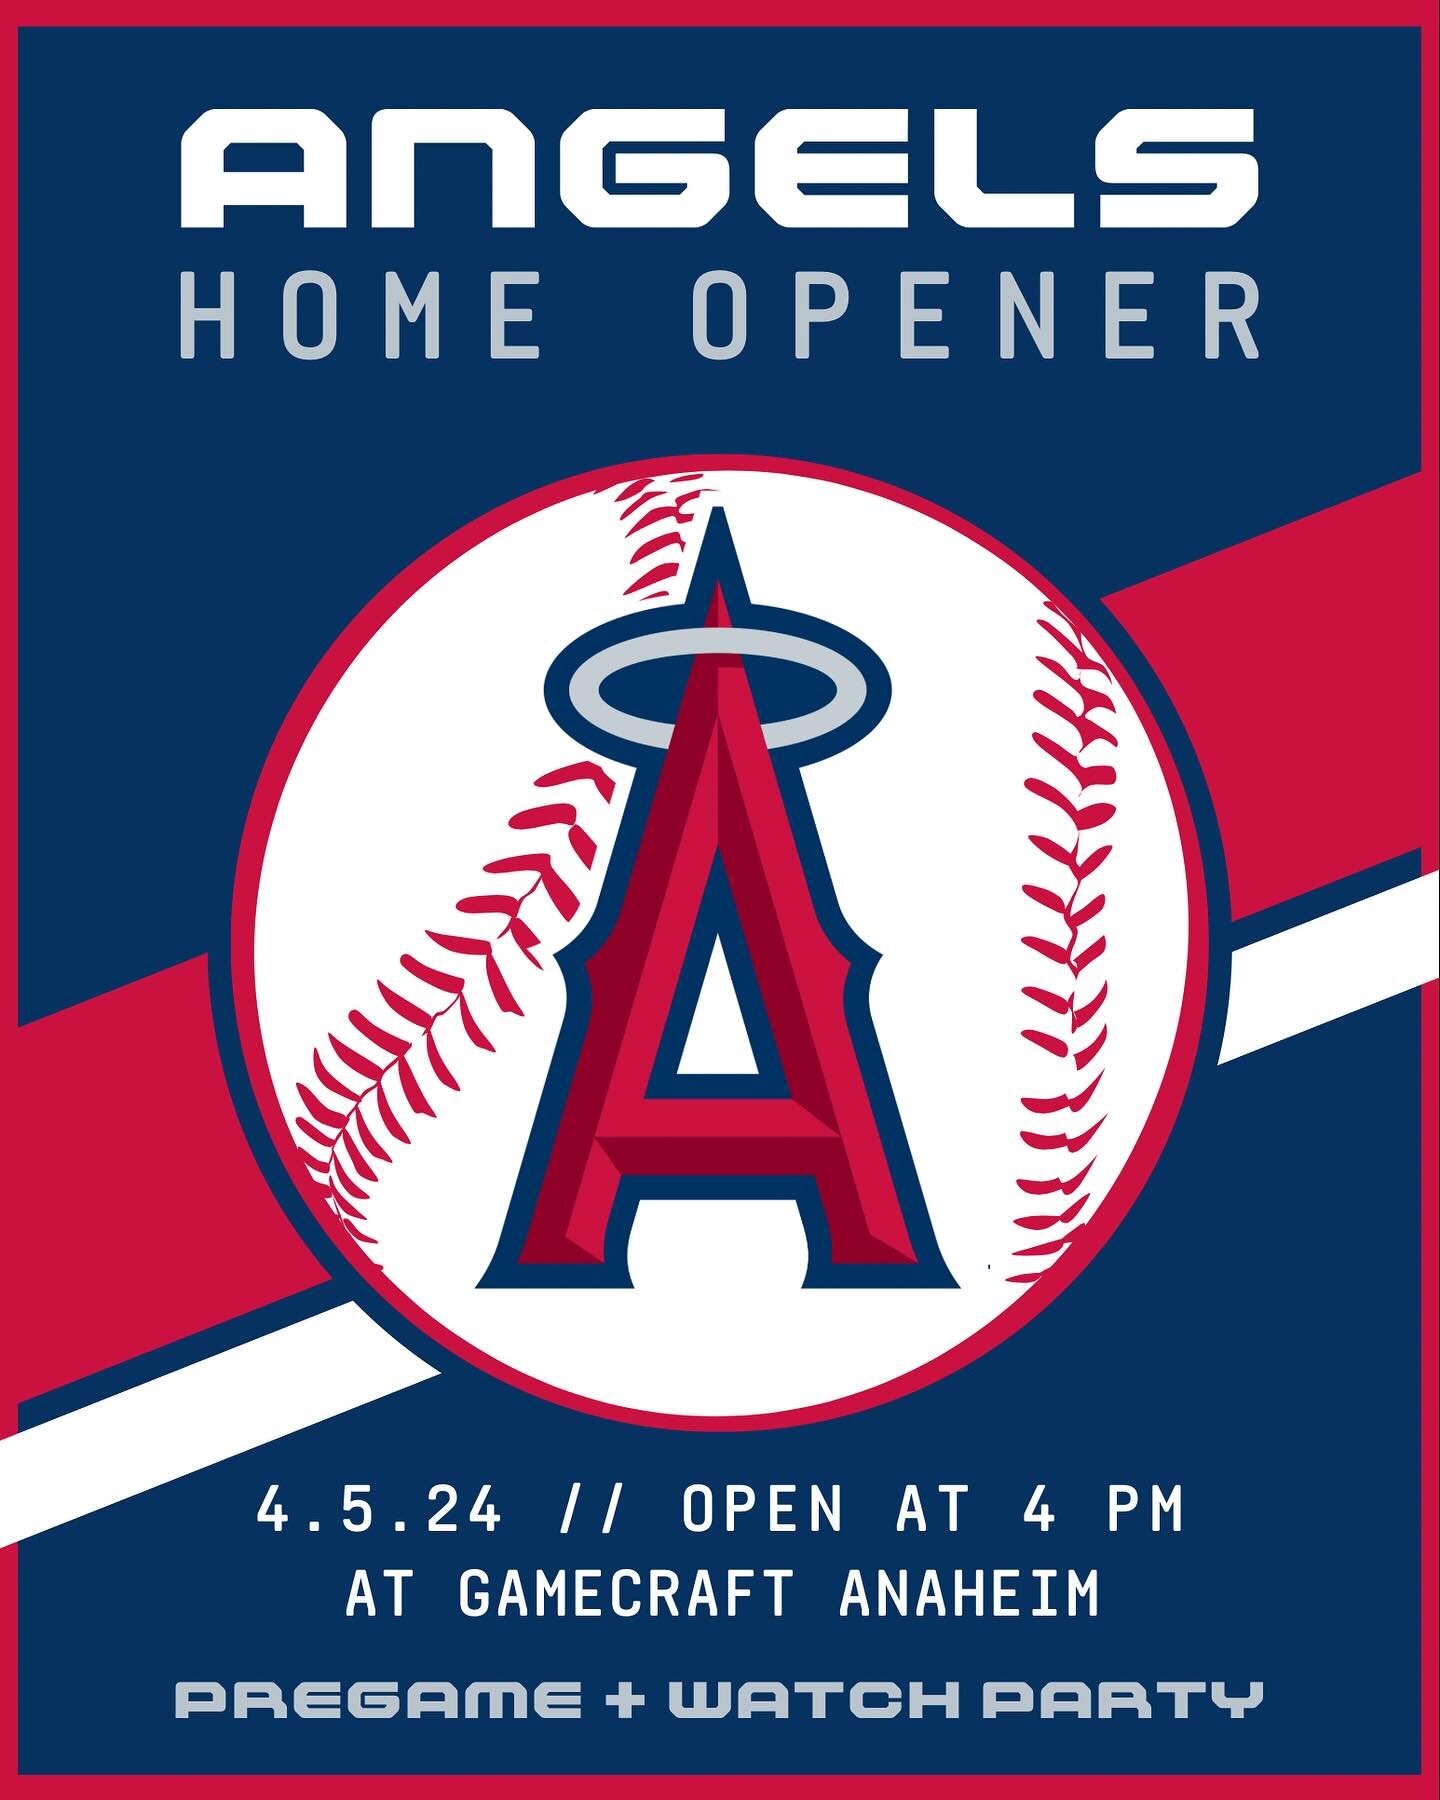 🎉 Get pumped up for the Friday showdown! 🎉 

The Angels are kicking off their home opener against the Red Sox, and you&rsquo;re invited to join in on the excitement! 🍻 We&rsquo;re unlocking our doors at 4 PM, ready to serve up ice-cold drinks and 